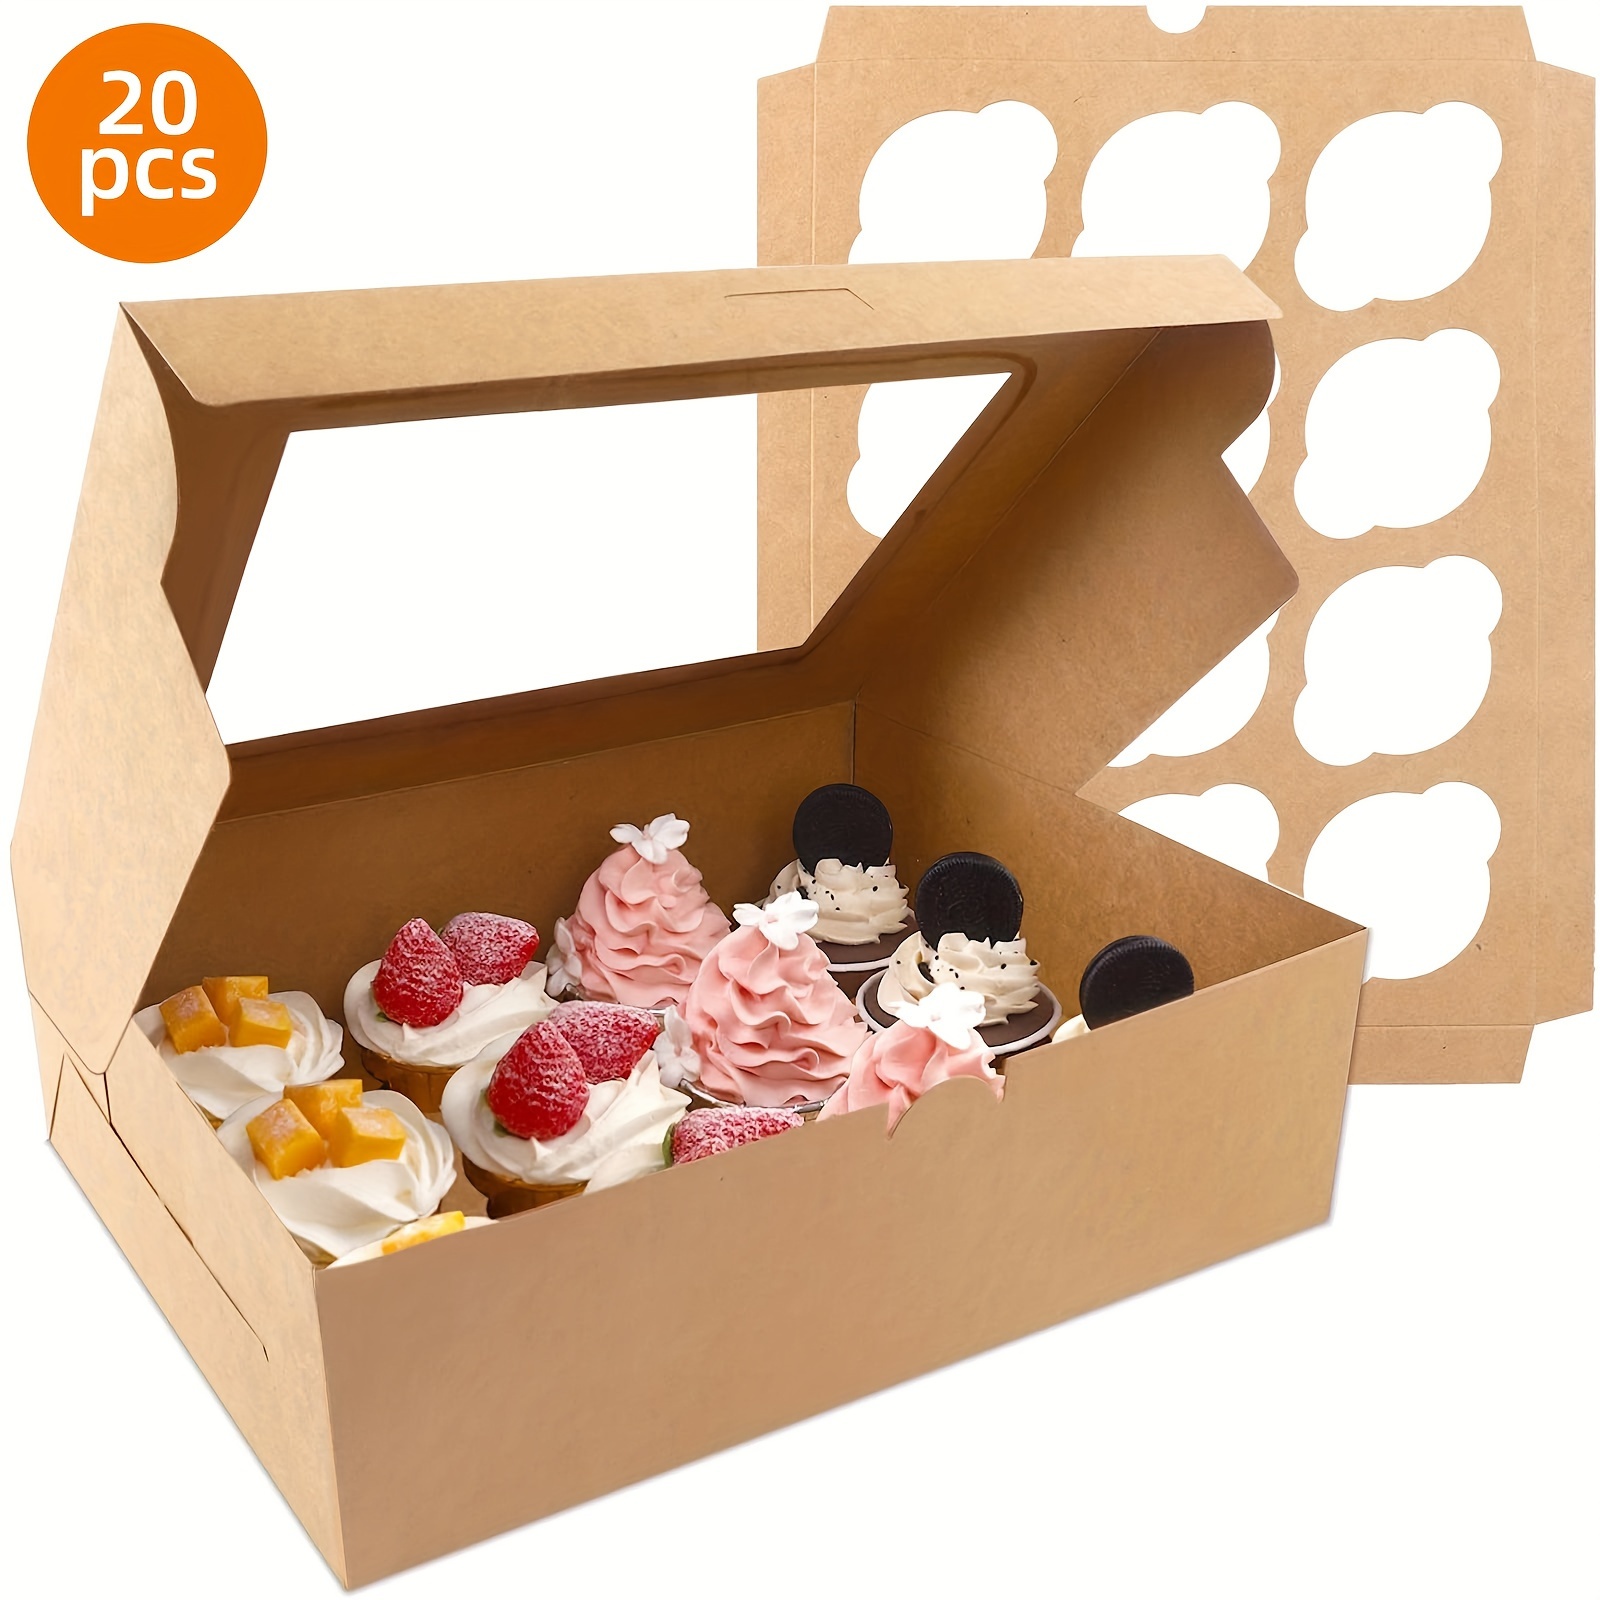 

12 Count X 20 Sets Cupcake Boxes, 13 X 10 X 3.5 Inches Brown Cupcake Containers, Kraft Bakery Carrier Boxes Holders With Windows And Inserts To Hold Cupcakes, Muffins And Pastries